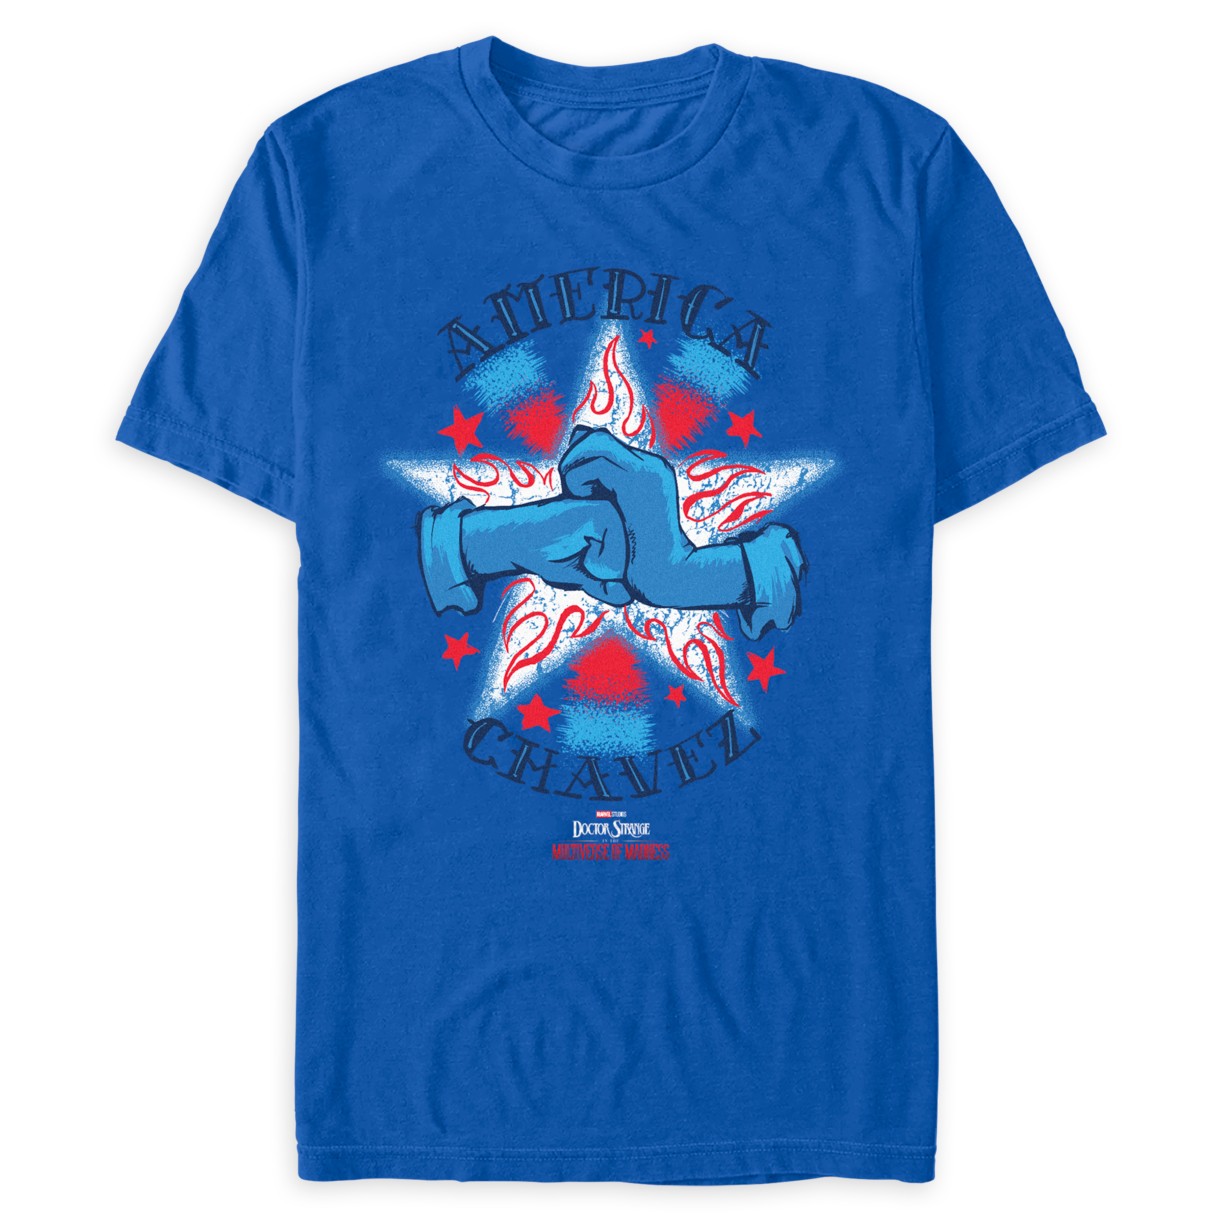 America Chavez Emblem T-Shirt for Adults – Doctor Strange in the Multiverse of Madness